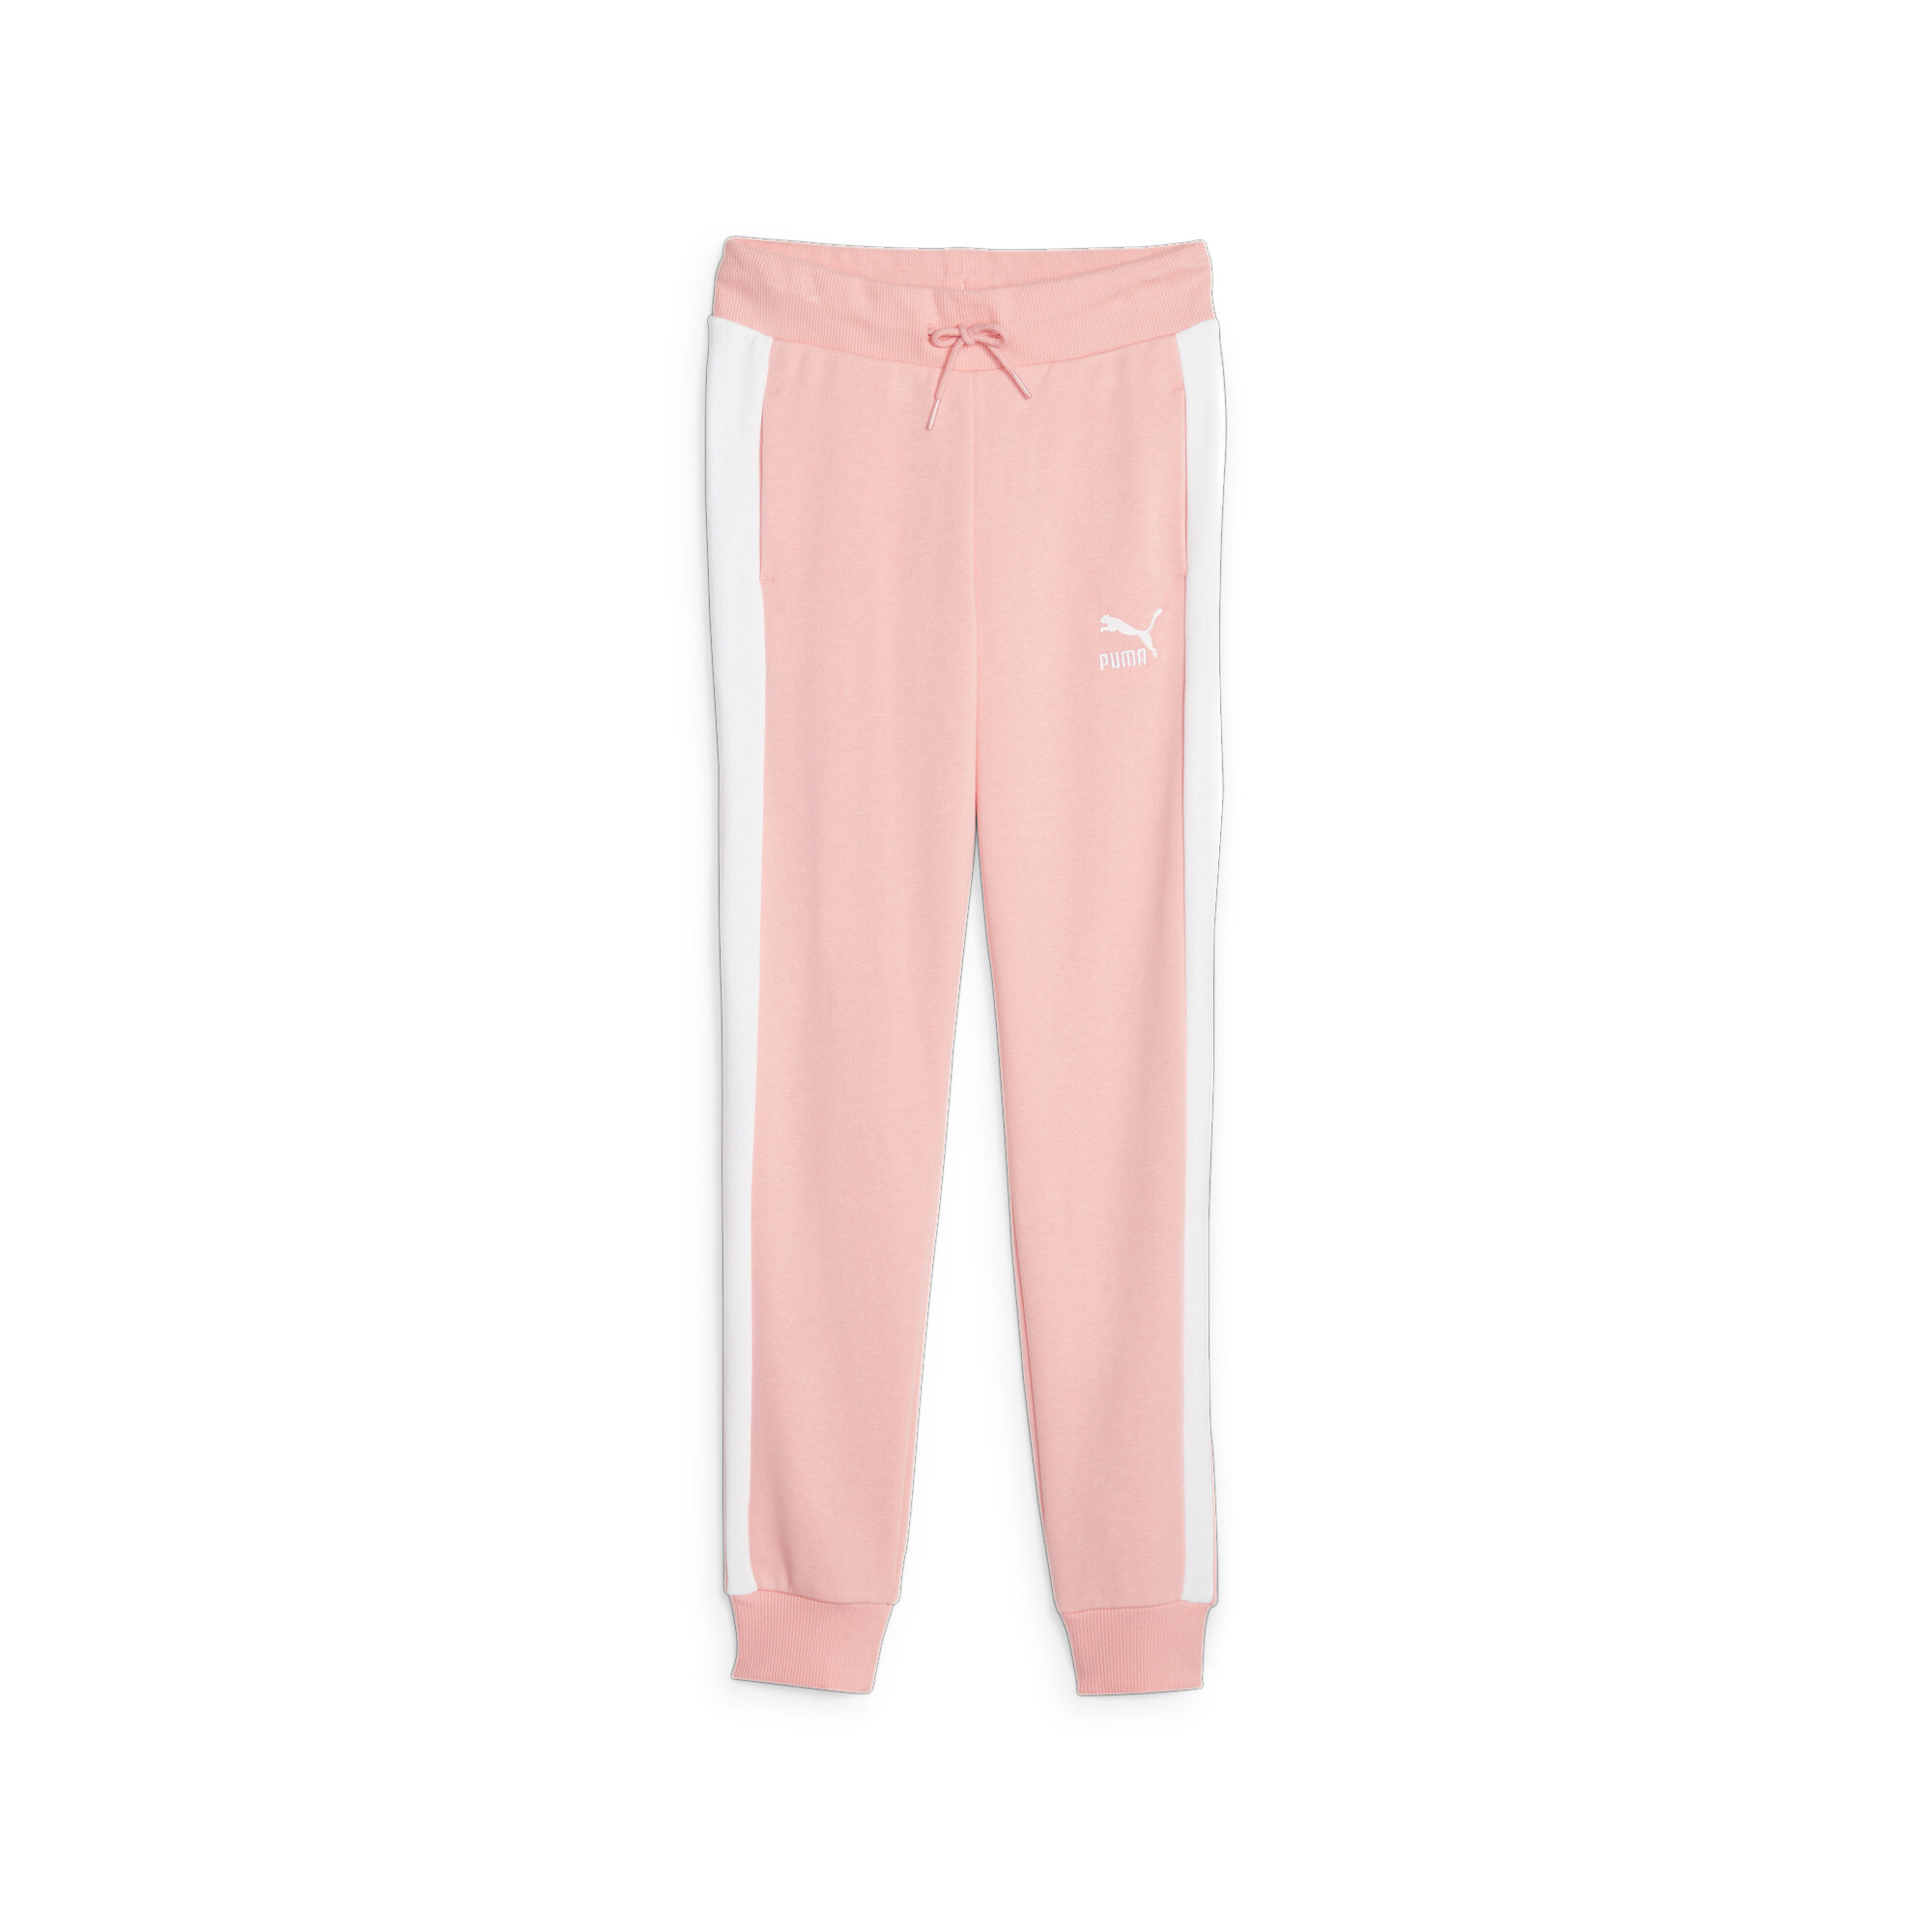 PUMA Classics T7 Track Pants In Pink, Size 15-16 Youth